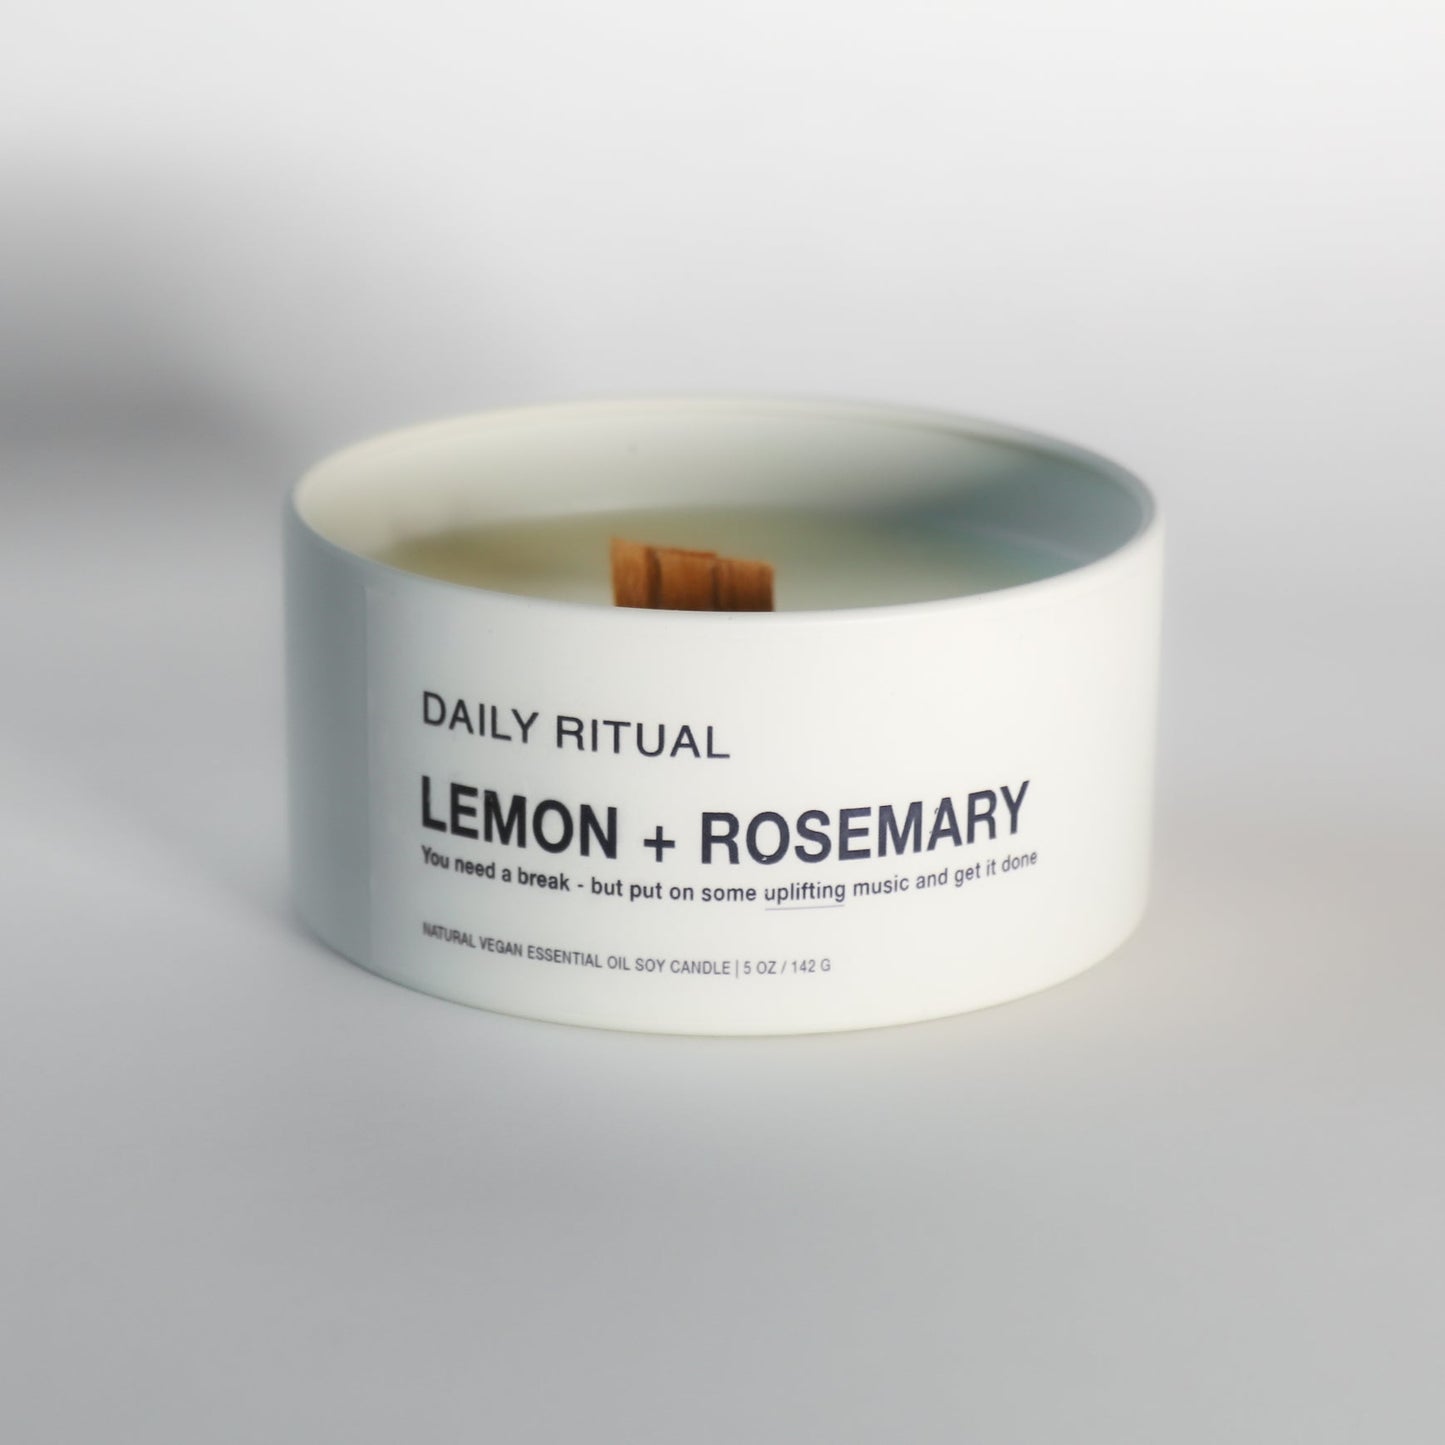 Lemon + Rosemary Soy Candle - Daily Ritual Apothecary